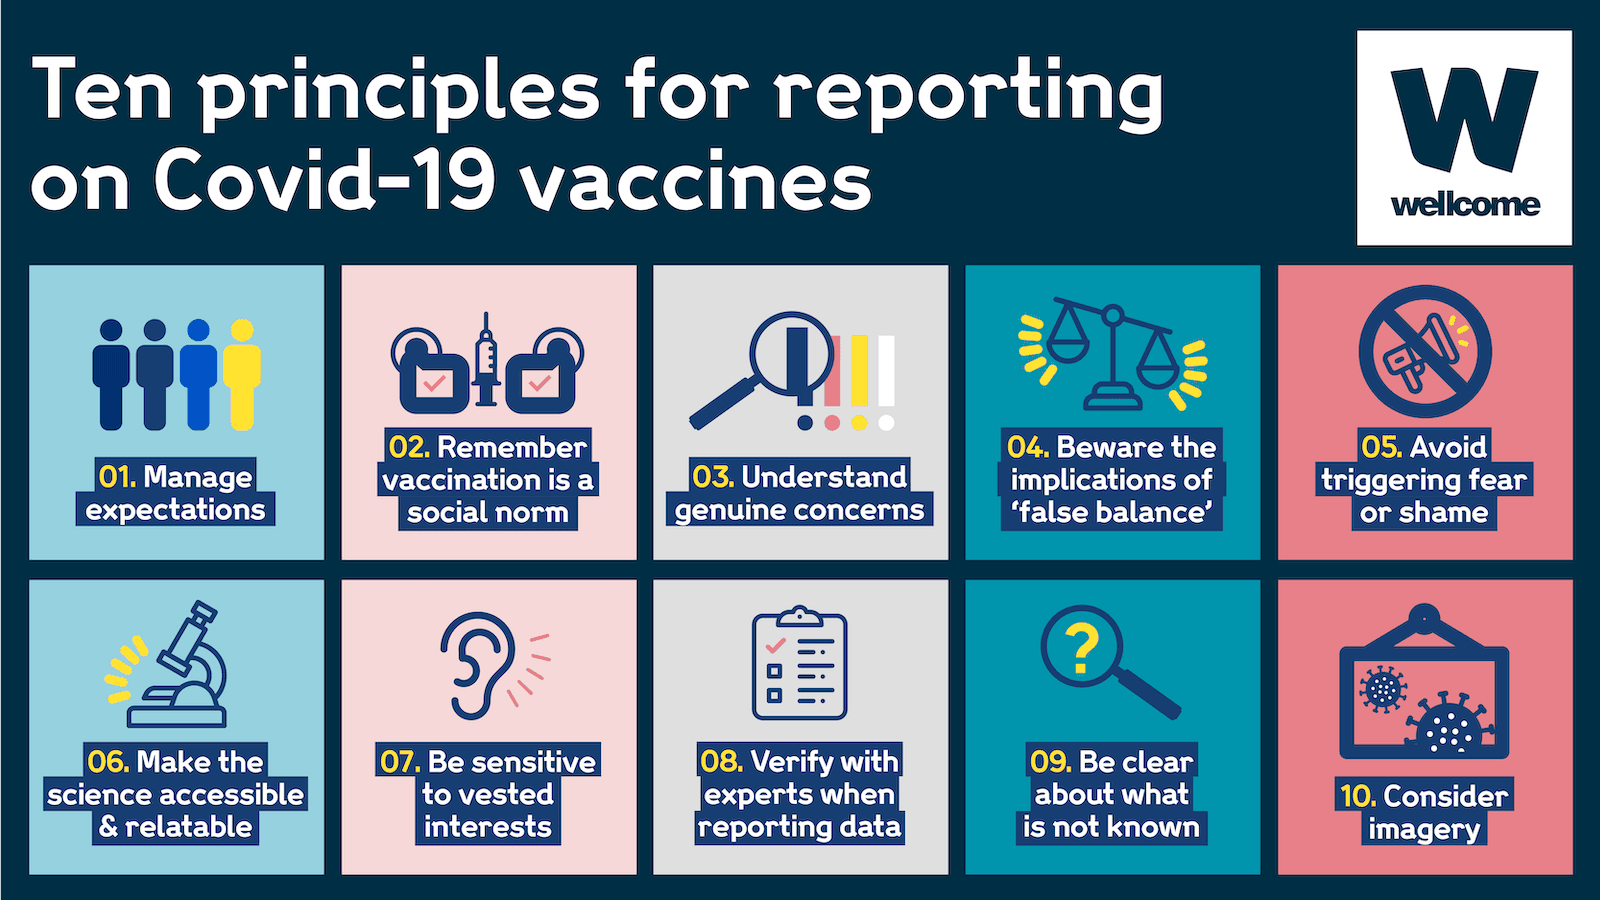 10 Principles for reporting on Covid-19 vaccines